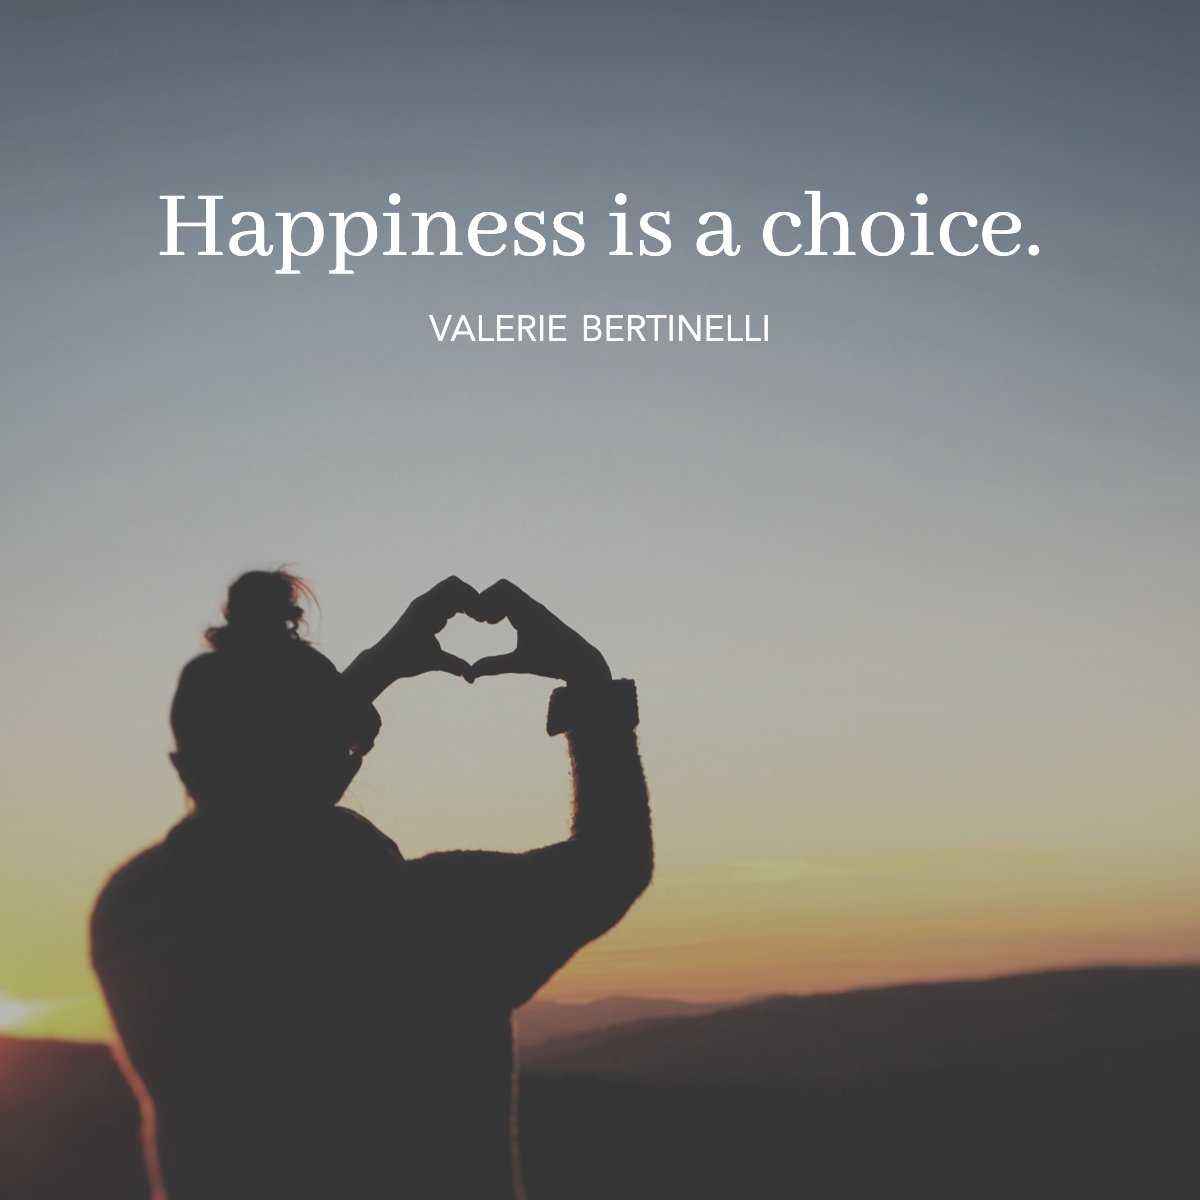 'Happiness is a choice. You can choose to be happy. There's going to be stress in life, but it's your choice whether you let it affect you or not.'  
― Valerie Bertinelli 🤗

#lifeisajourney #happinesss #choosehappy #instaquote #wisdom #wisdomquote #quoteoftheday